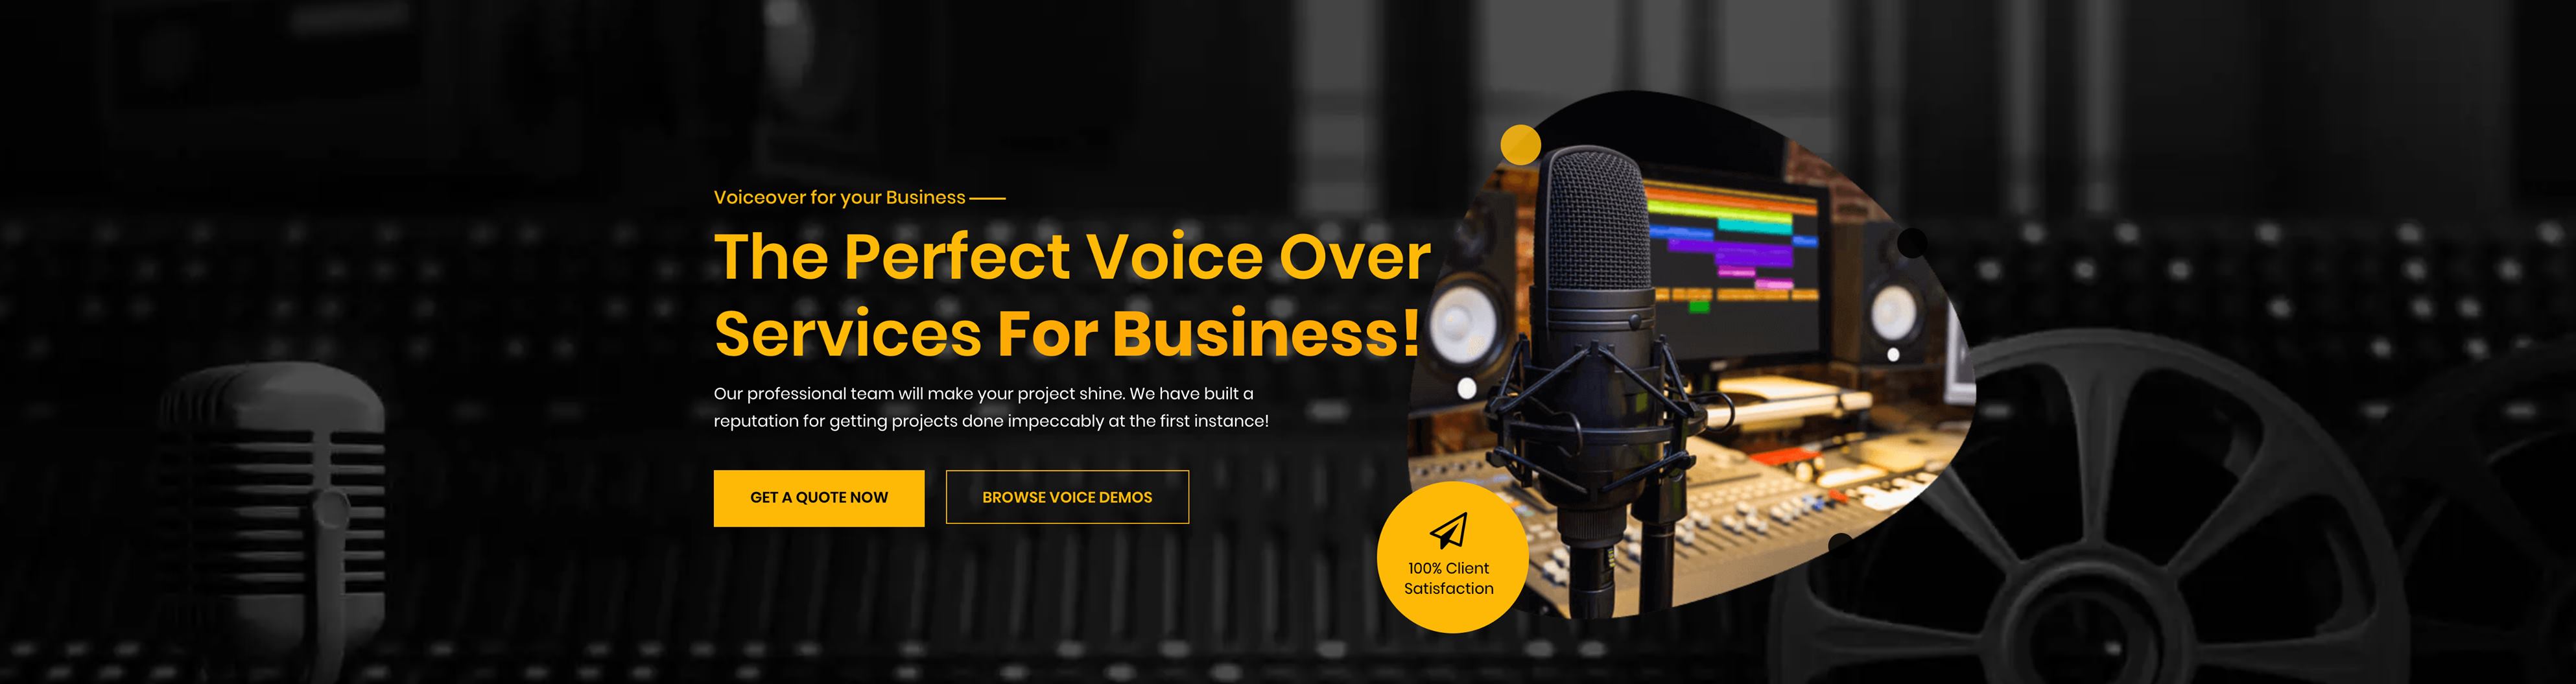 The perfect voiceover for your project